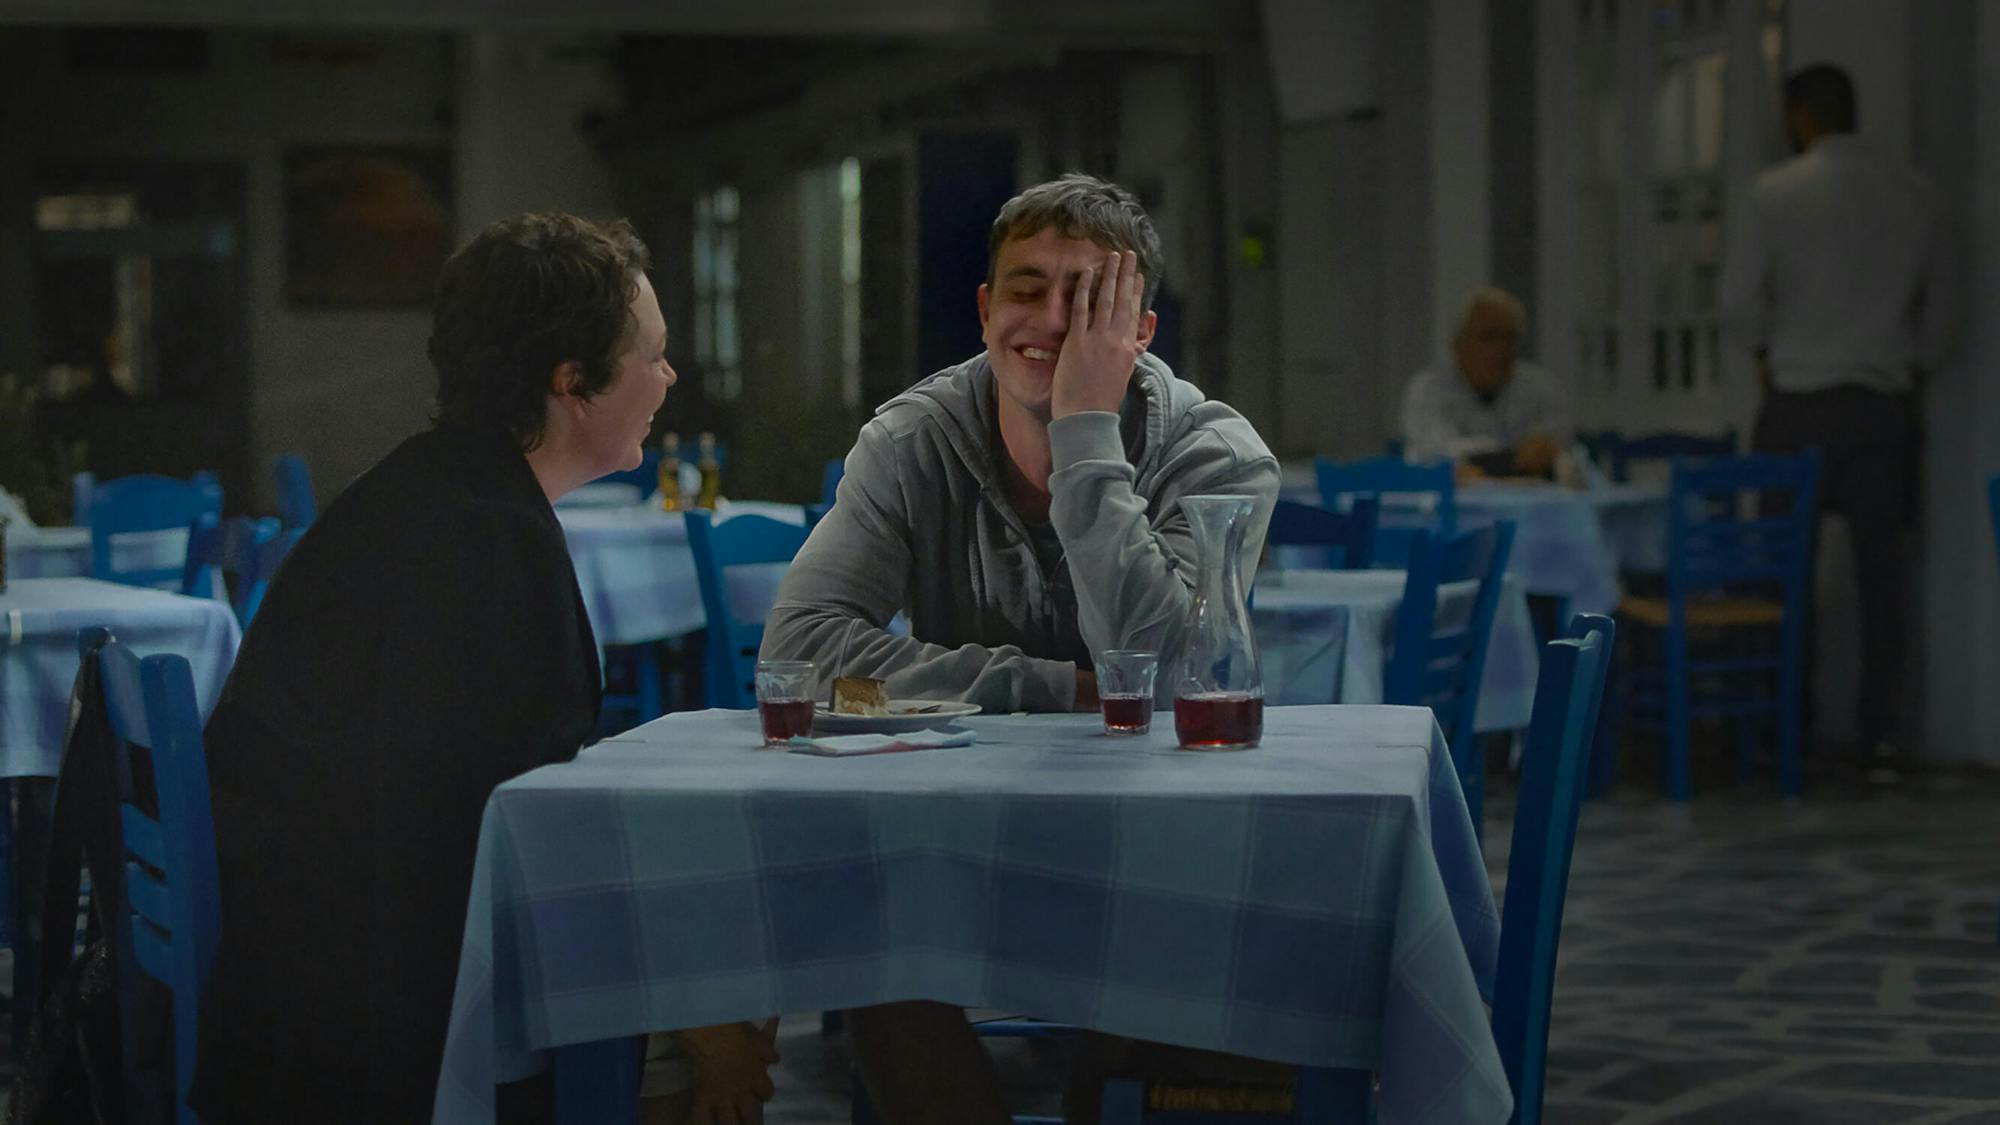 Leda (Olivia Colman) and Will (Paul Mescal) sit at a blue-checkered table-clothed table drinking red wine from a carafe and laughing.